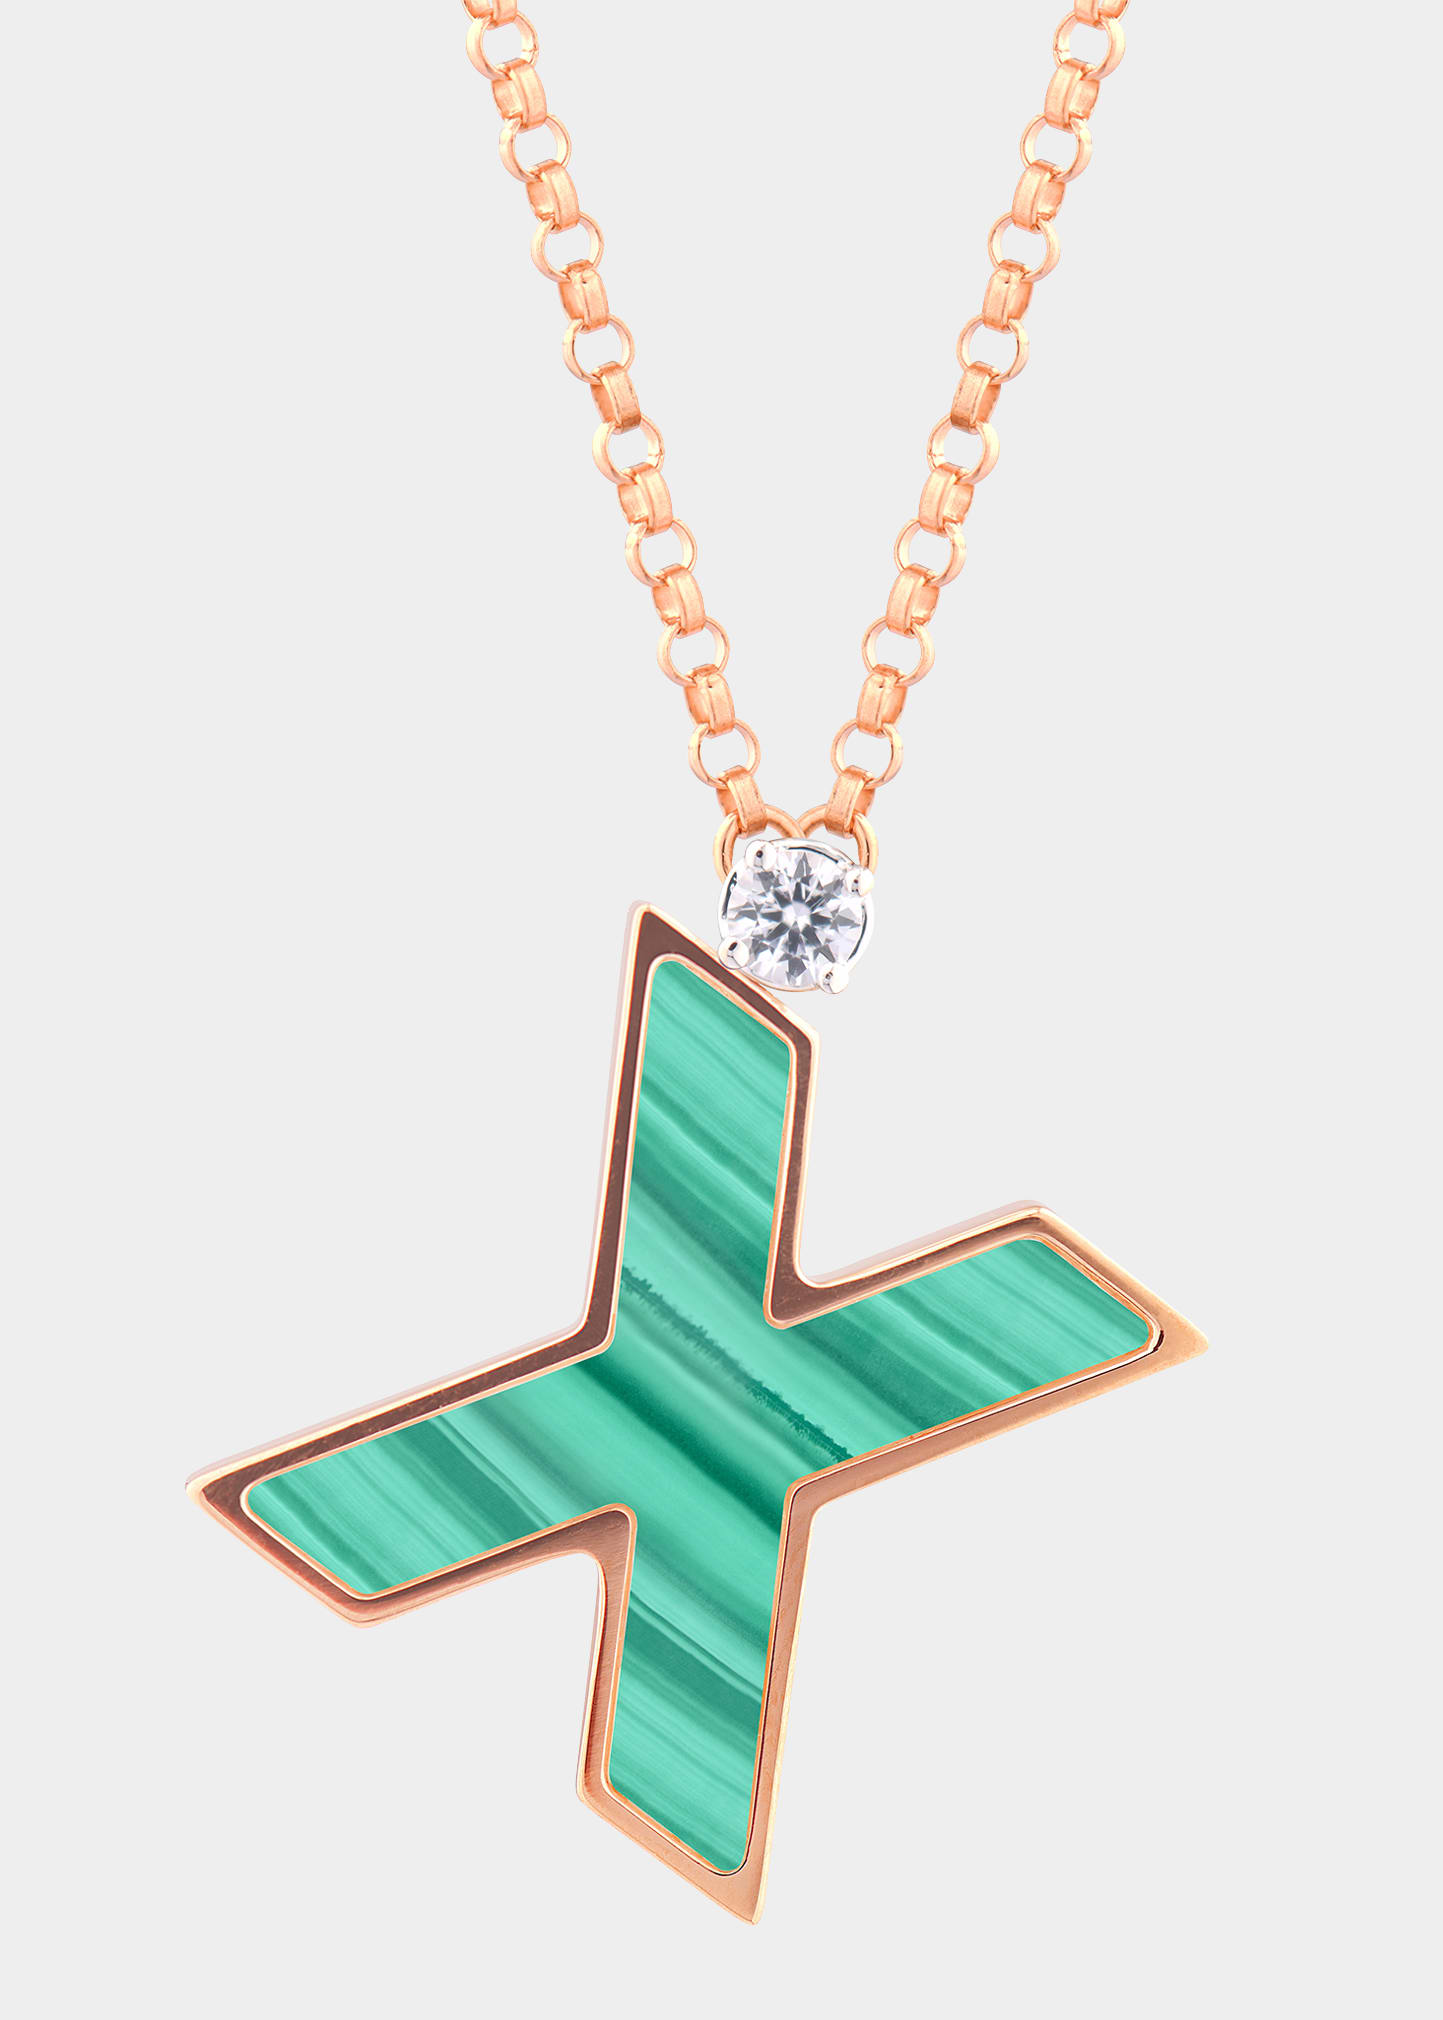 Rose Gold 'X' Letter Charm Necklace with Malachite and White Sapphire